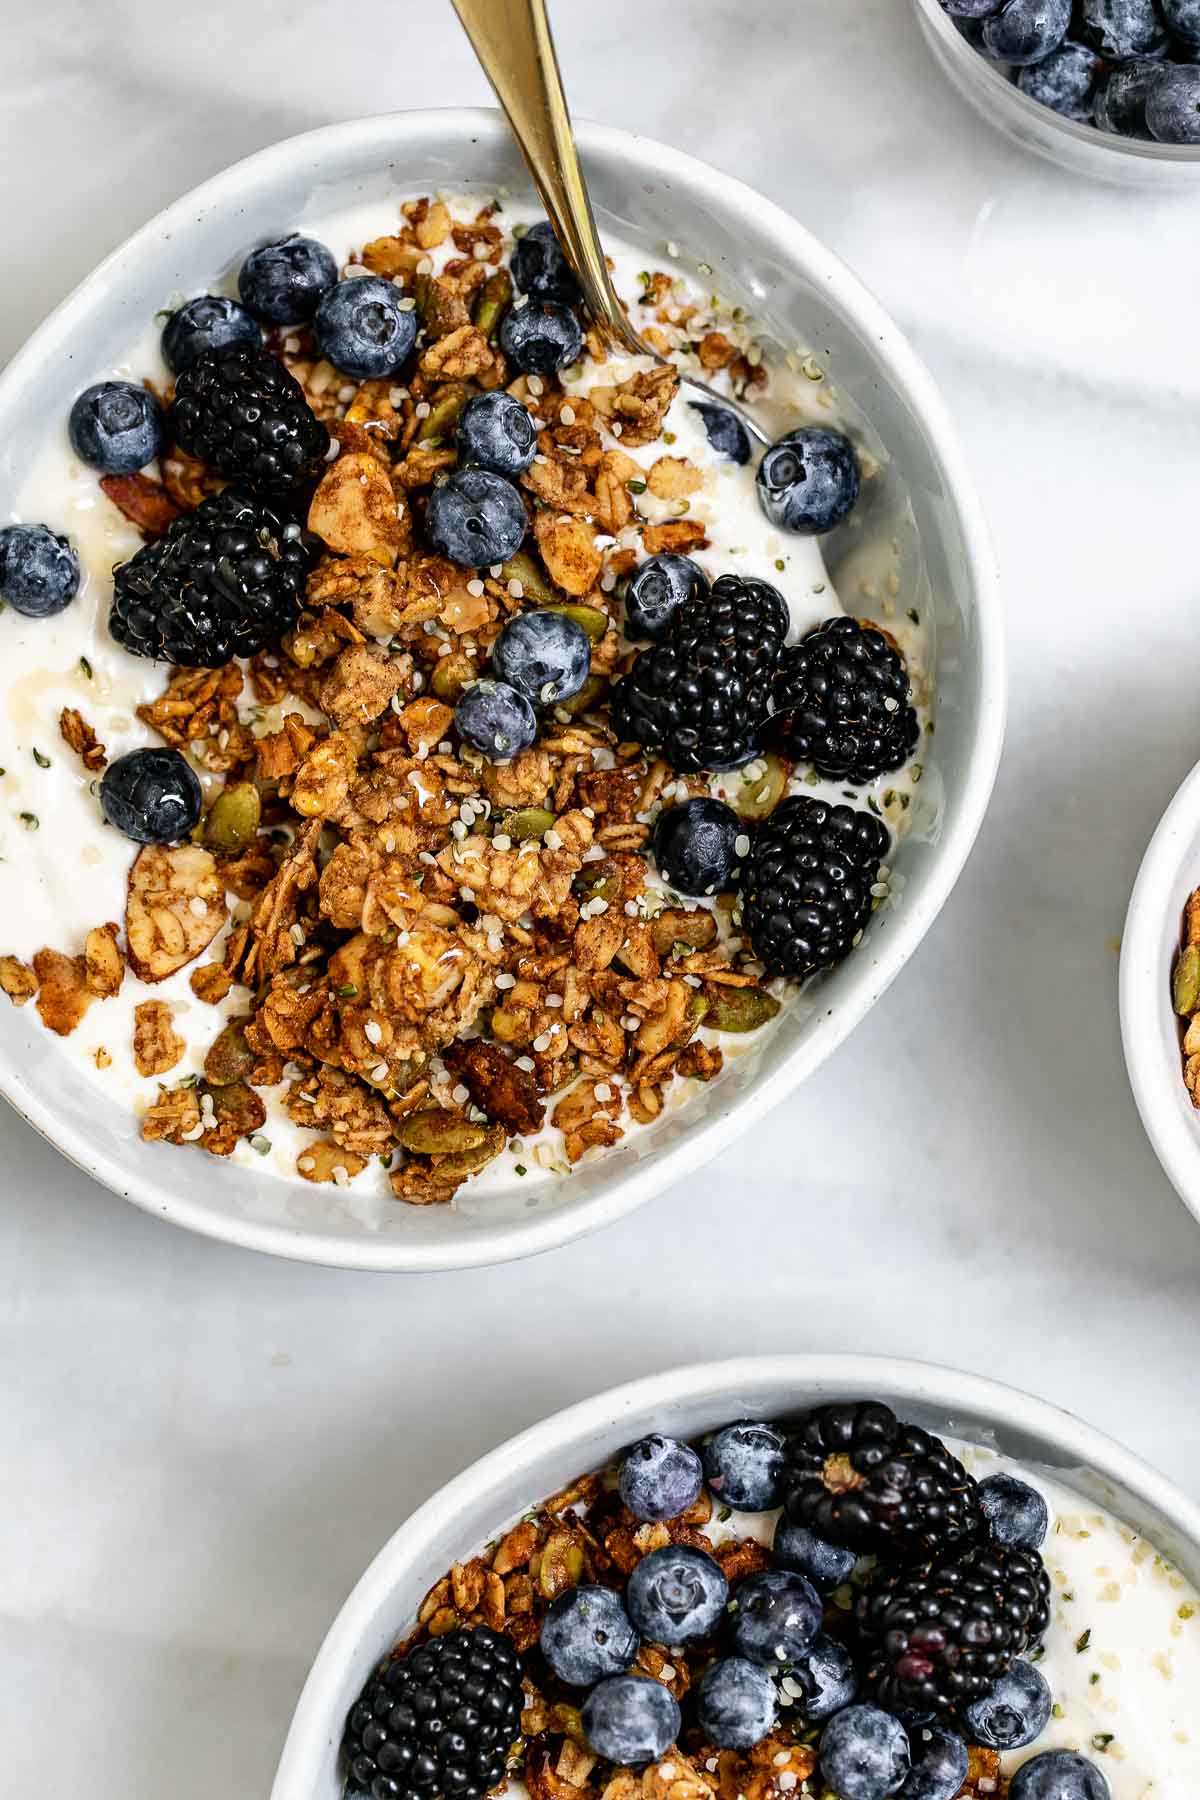 Two bowls with yogurt, granola and berries.